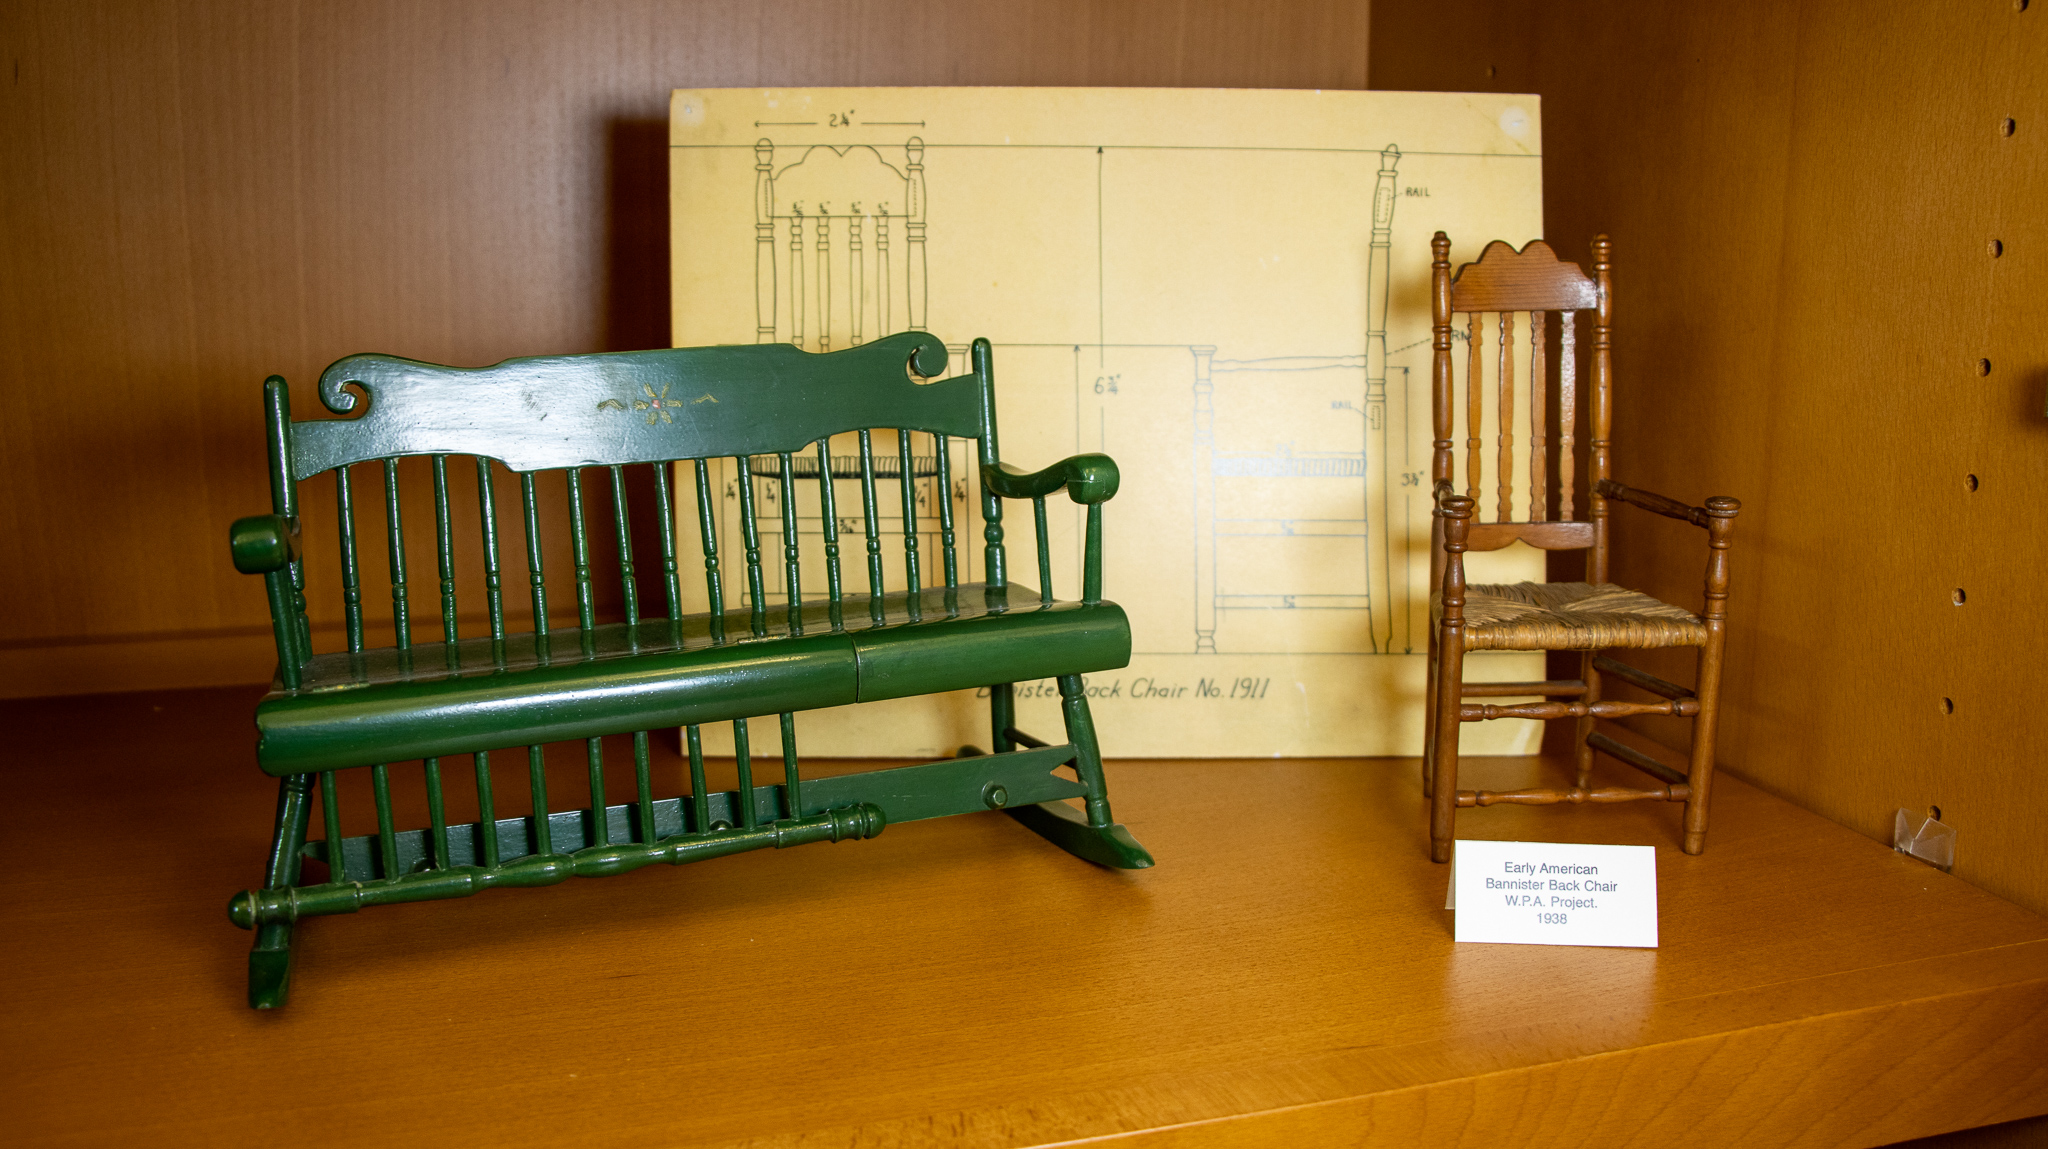 WPA Doll Furniture: Green Bench; Early American Bannister Back Chair, WPA Project, 1938